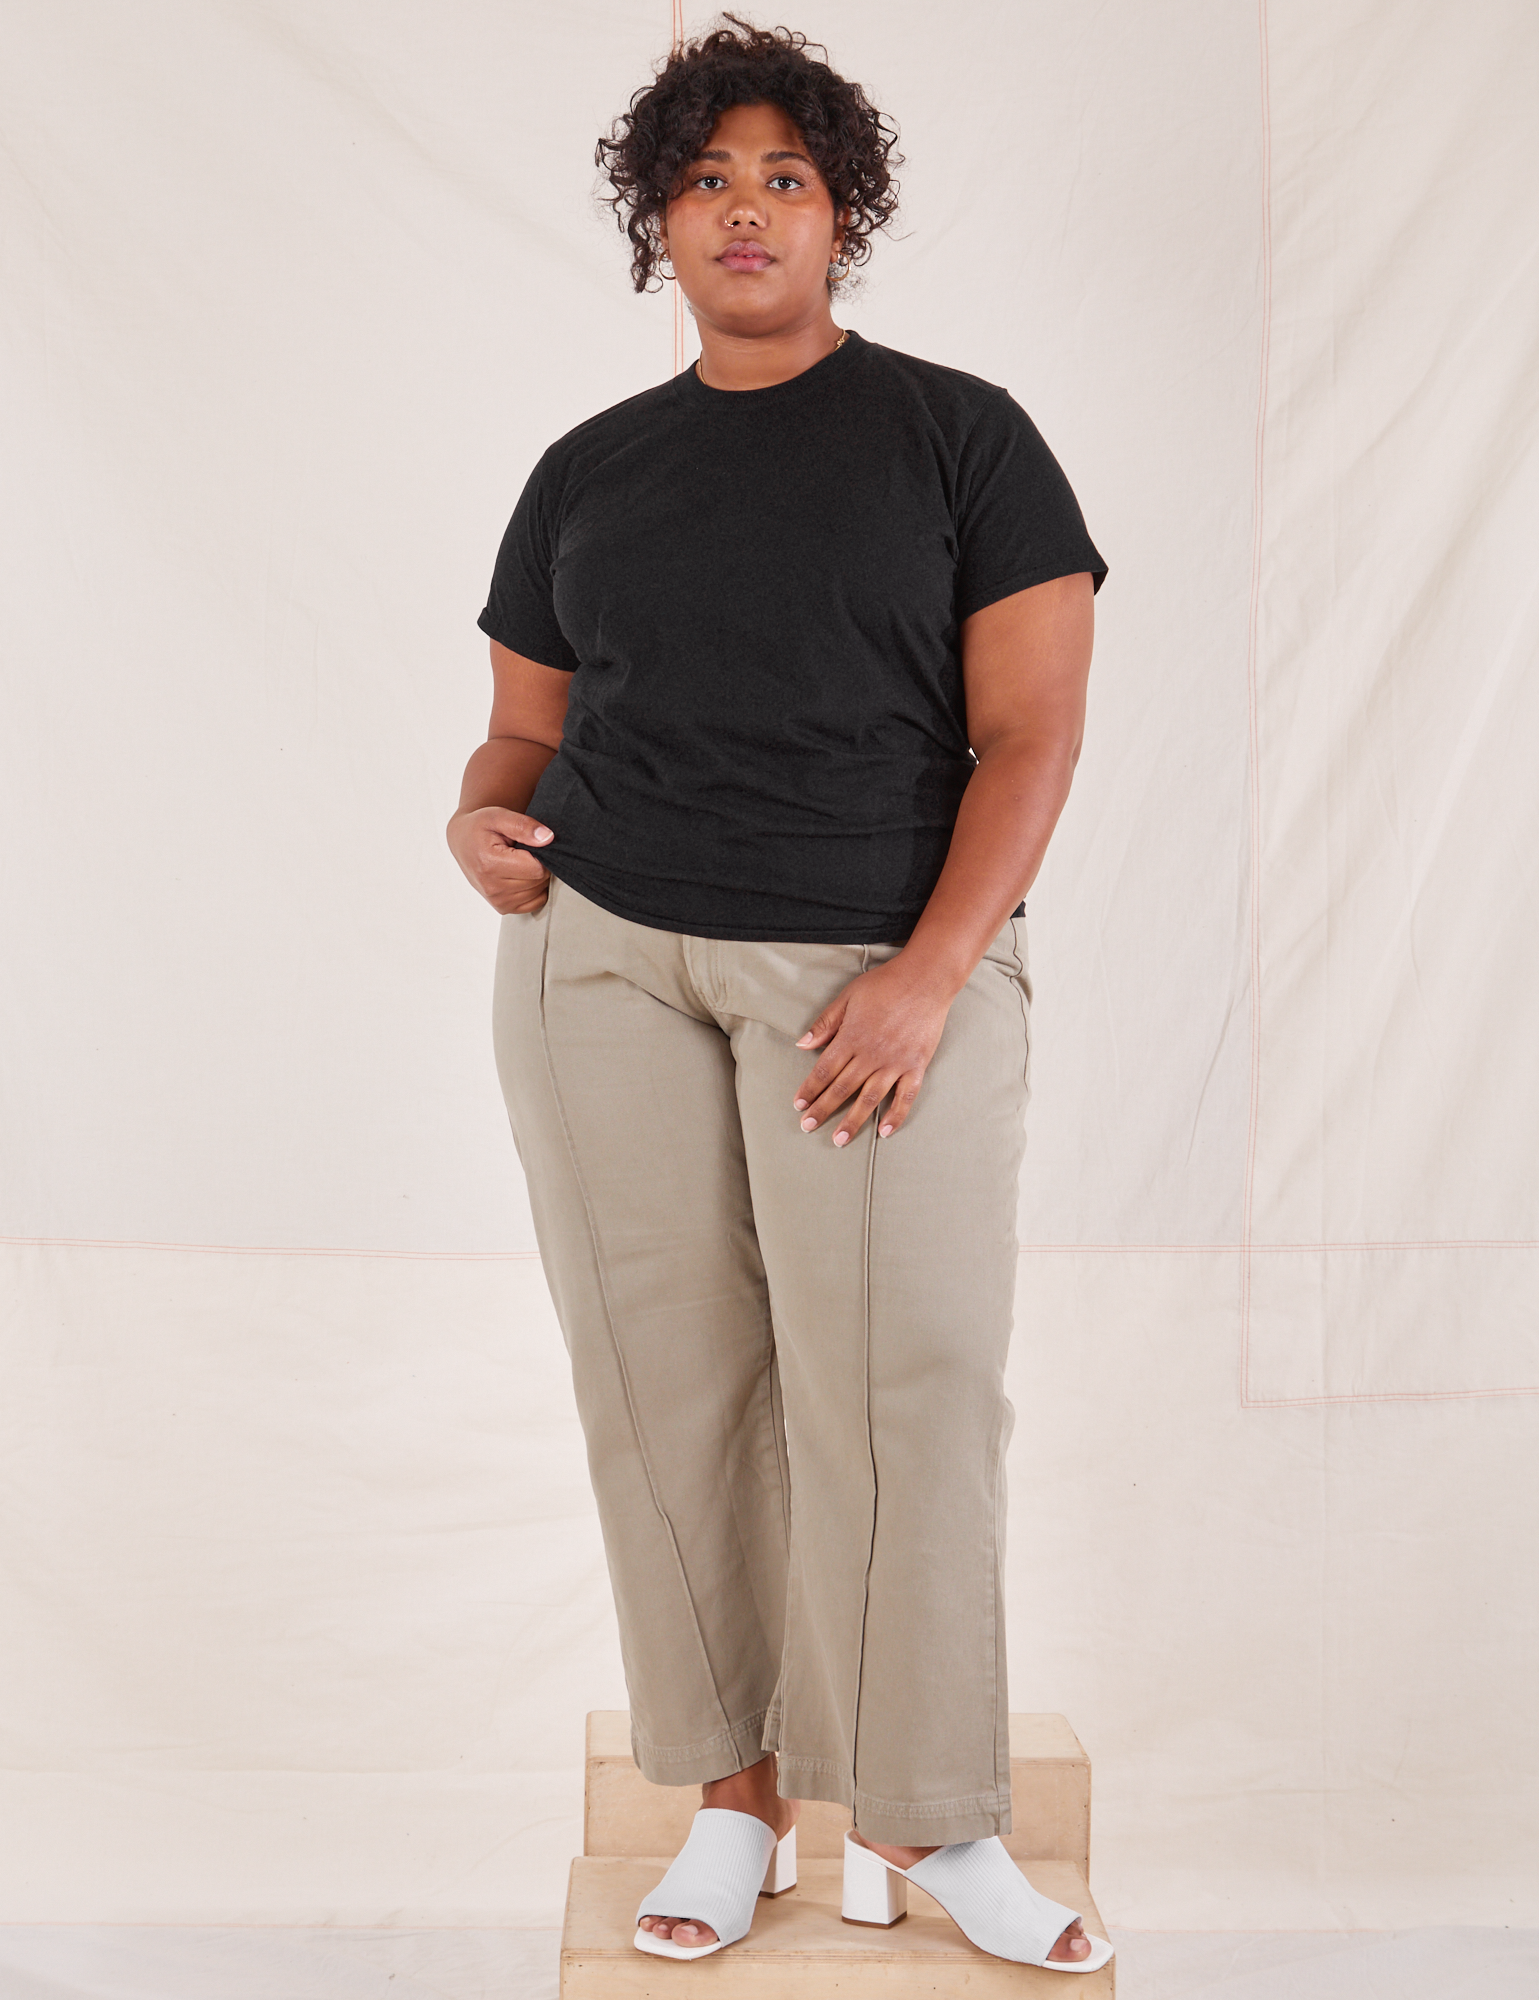 Morgan is wearing L Organic Vintage Tee in Basic Black paired with khaki grey Western Pants